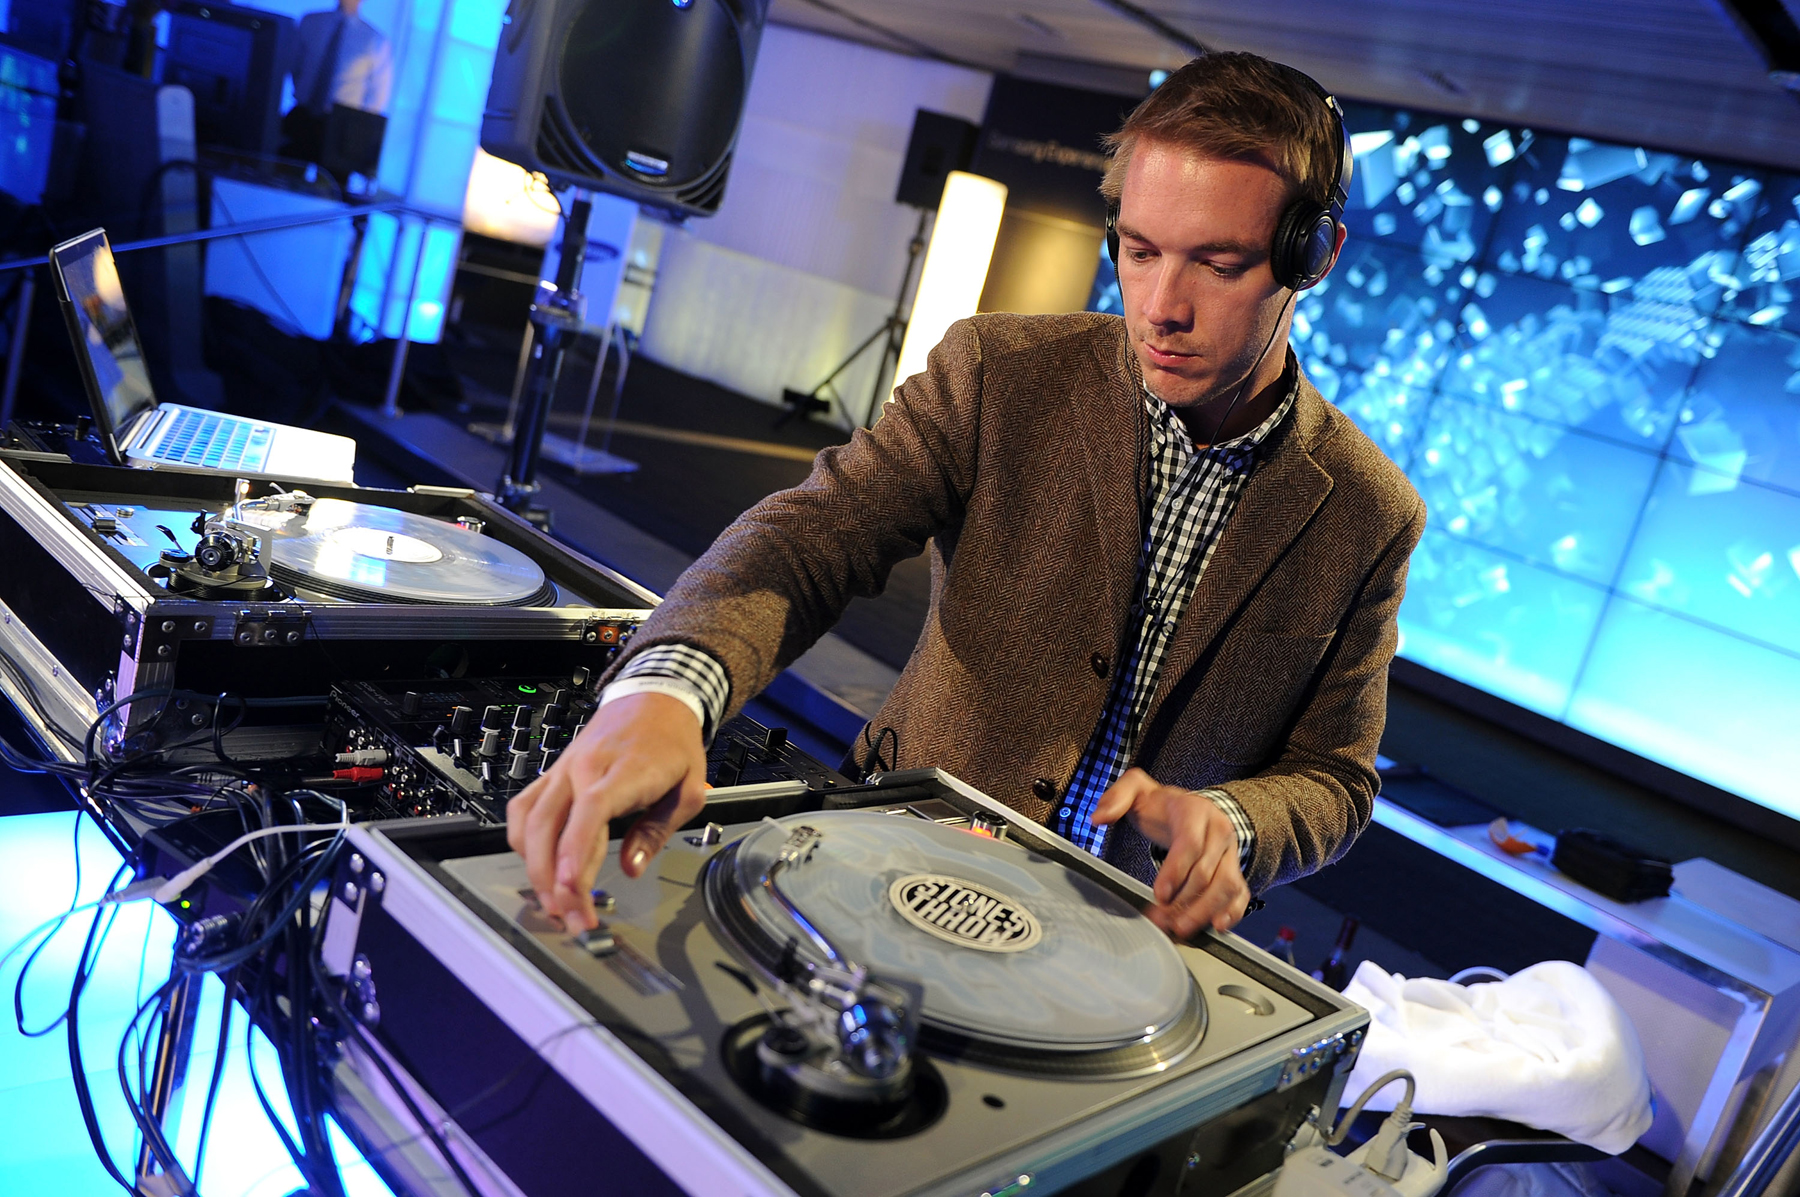 NEW YORK - MARCH 10:  DJ Diplo attends the Samsung 3D LED TV launch party with THE BLACK EYED PEAS at Time Warner Center on March 10, 2010 in New York City.  (Photo by Theo Wargo/Getty Images for Samsung) *** Local Caption *** DJ Diplo